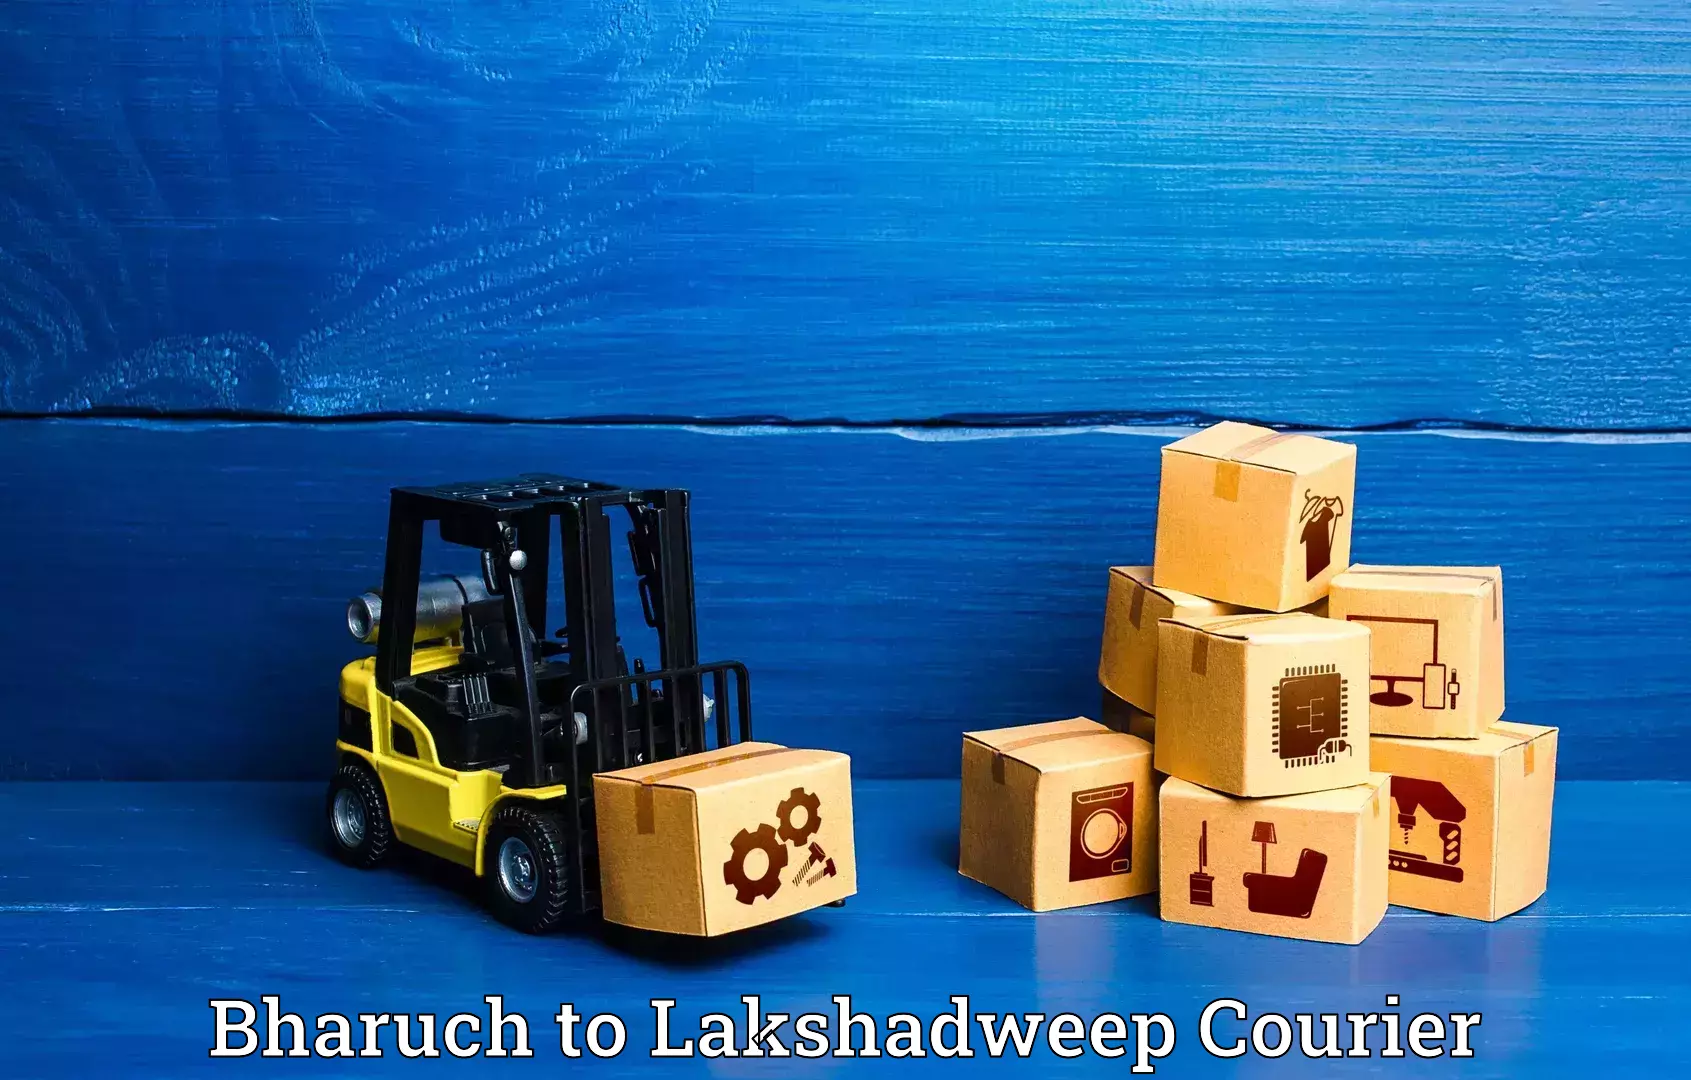 Luggage transport consultancy Bharuch to Lakshadweep